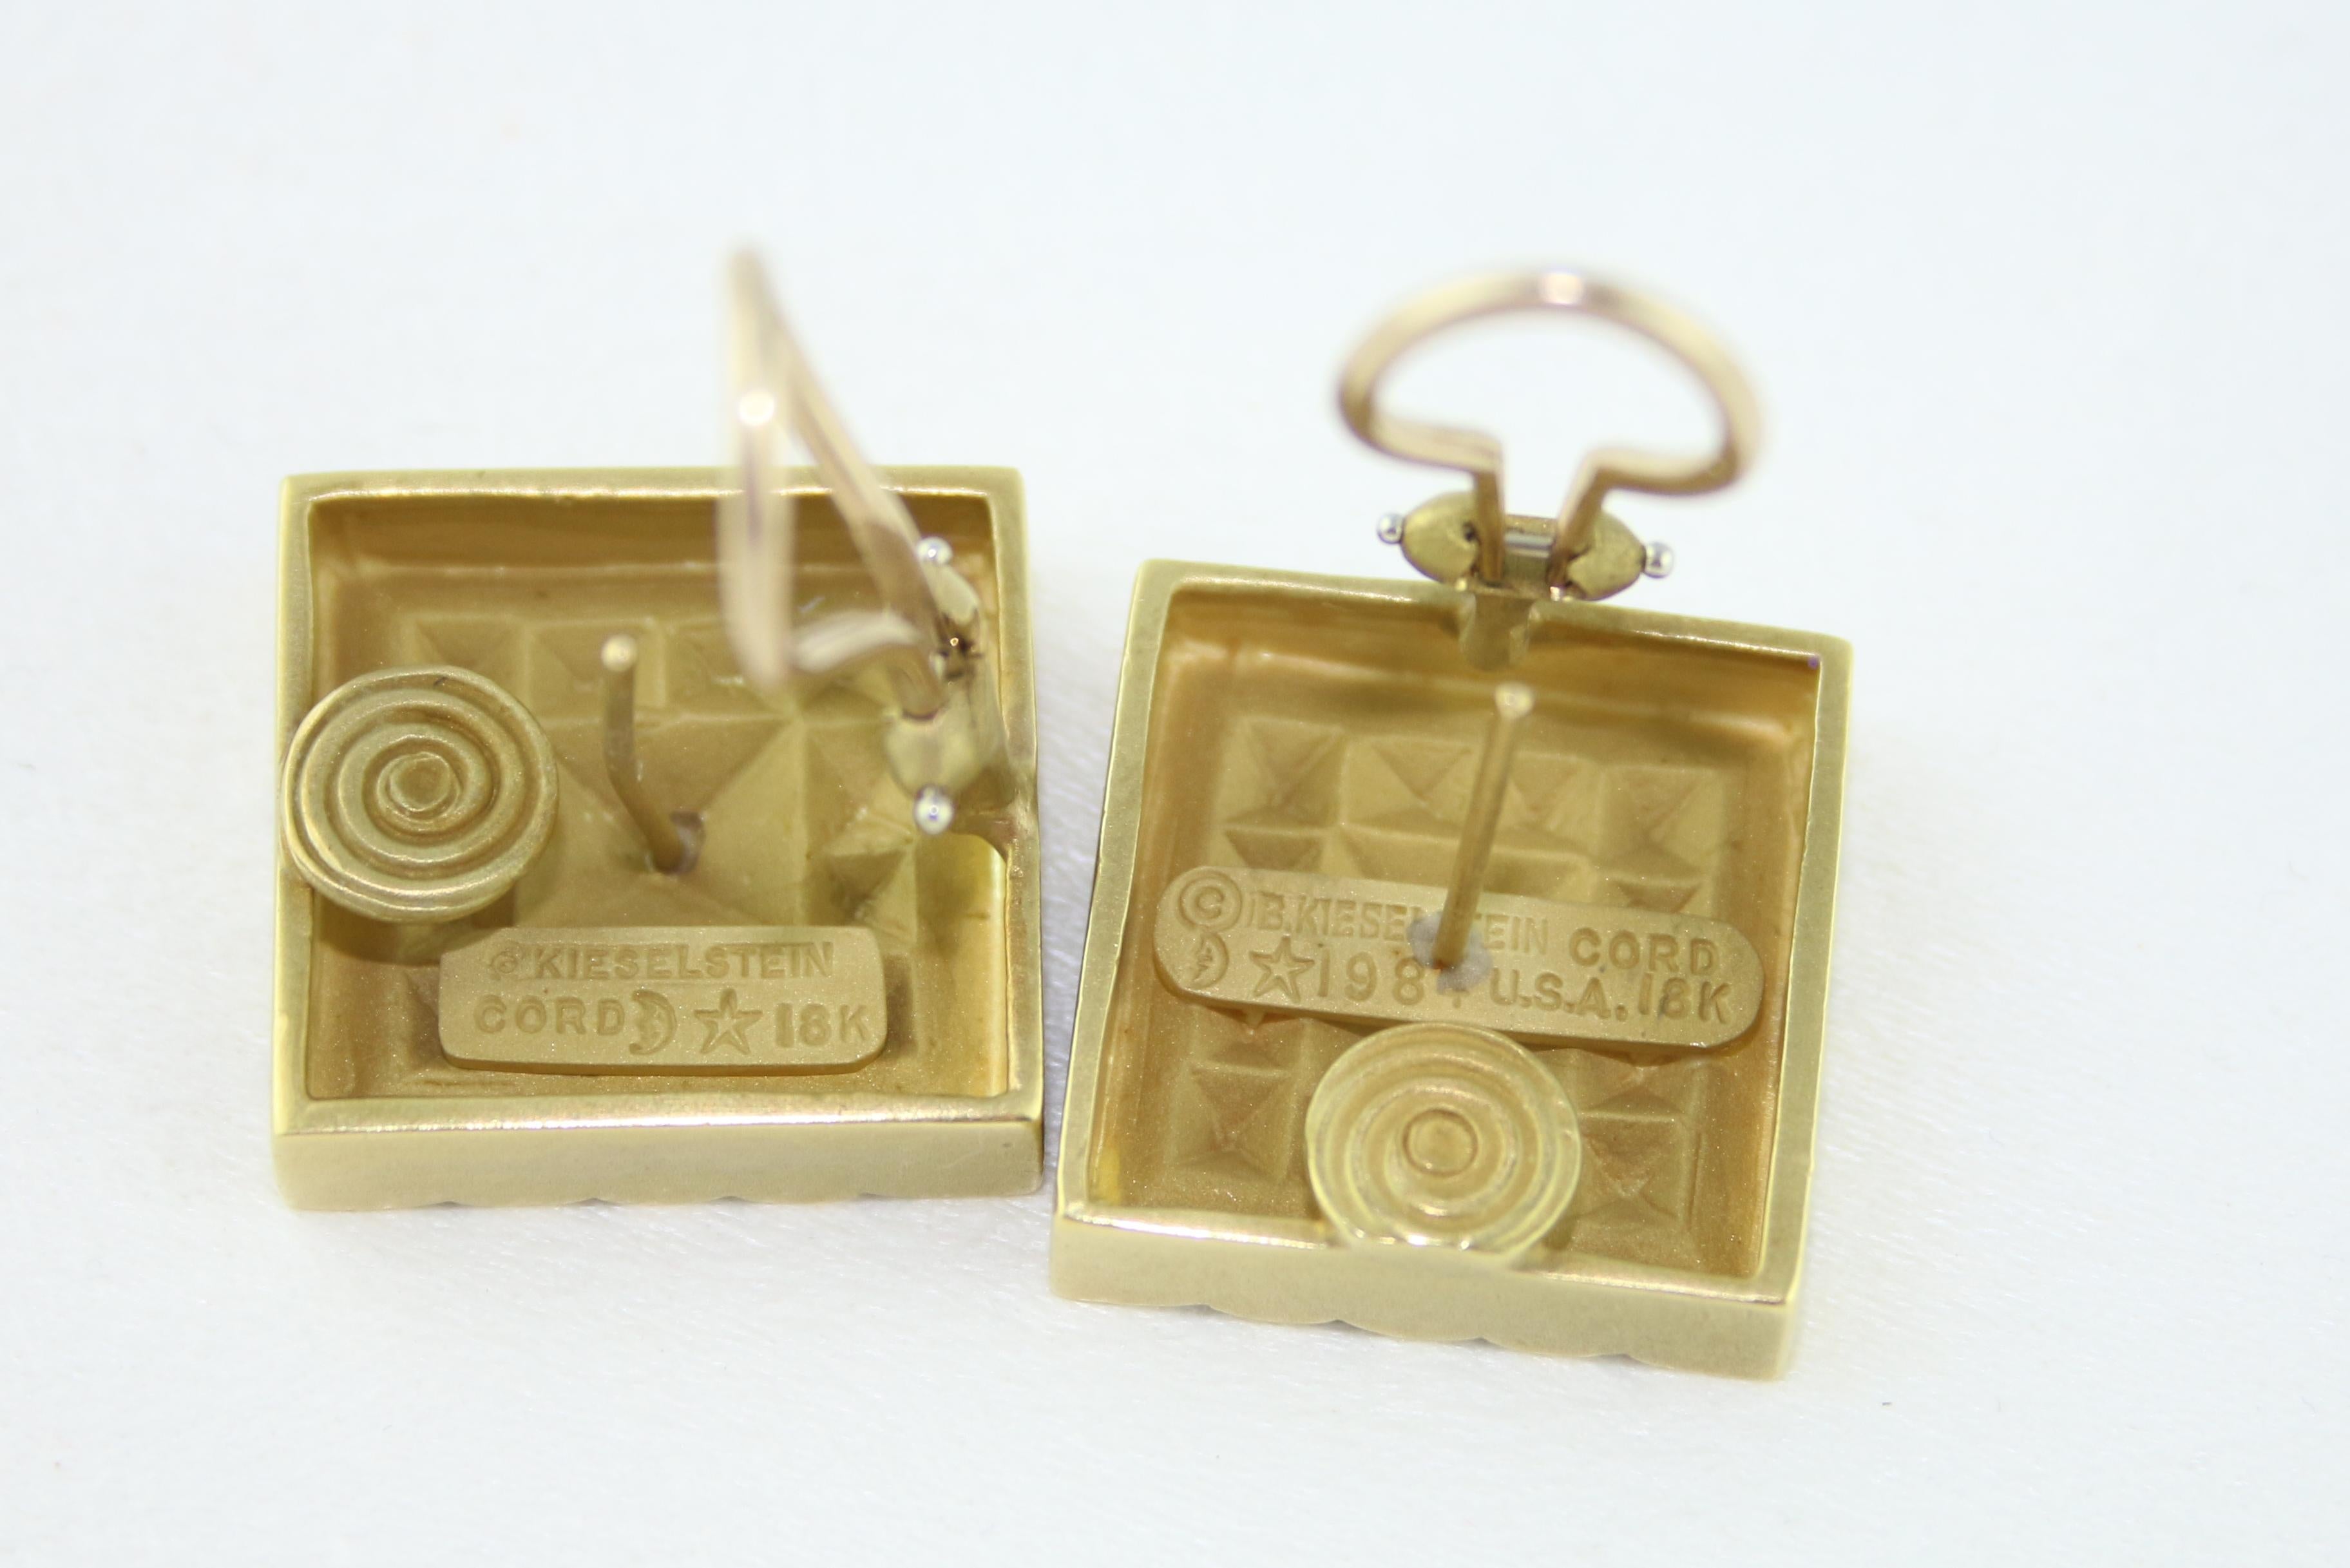 Barry Kieselstein-Cord Square Pyramid Textured Gold Earrings, 1984 For Sale 1